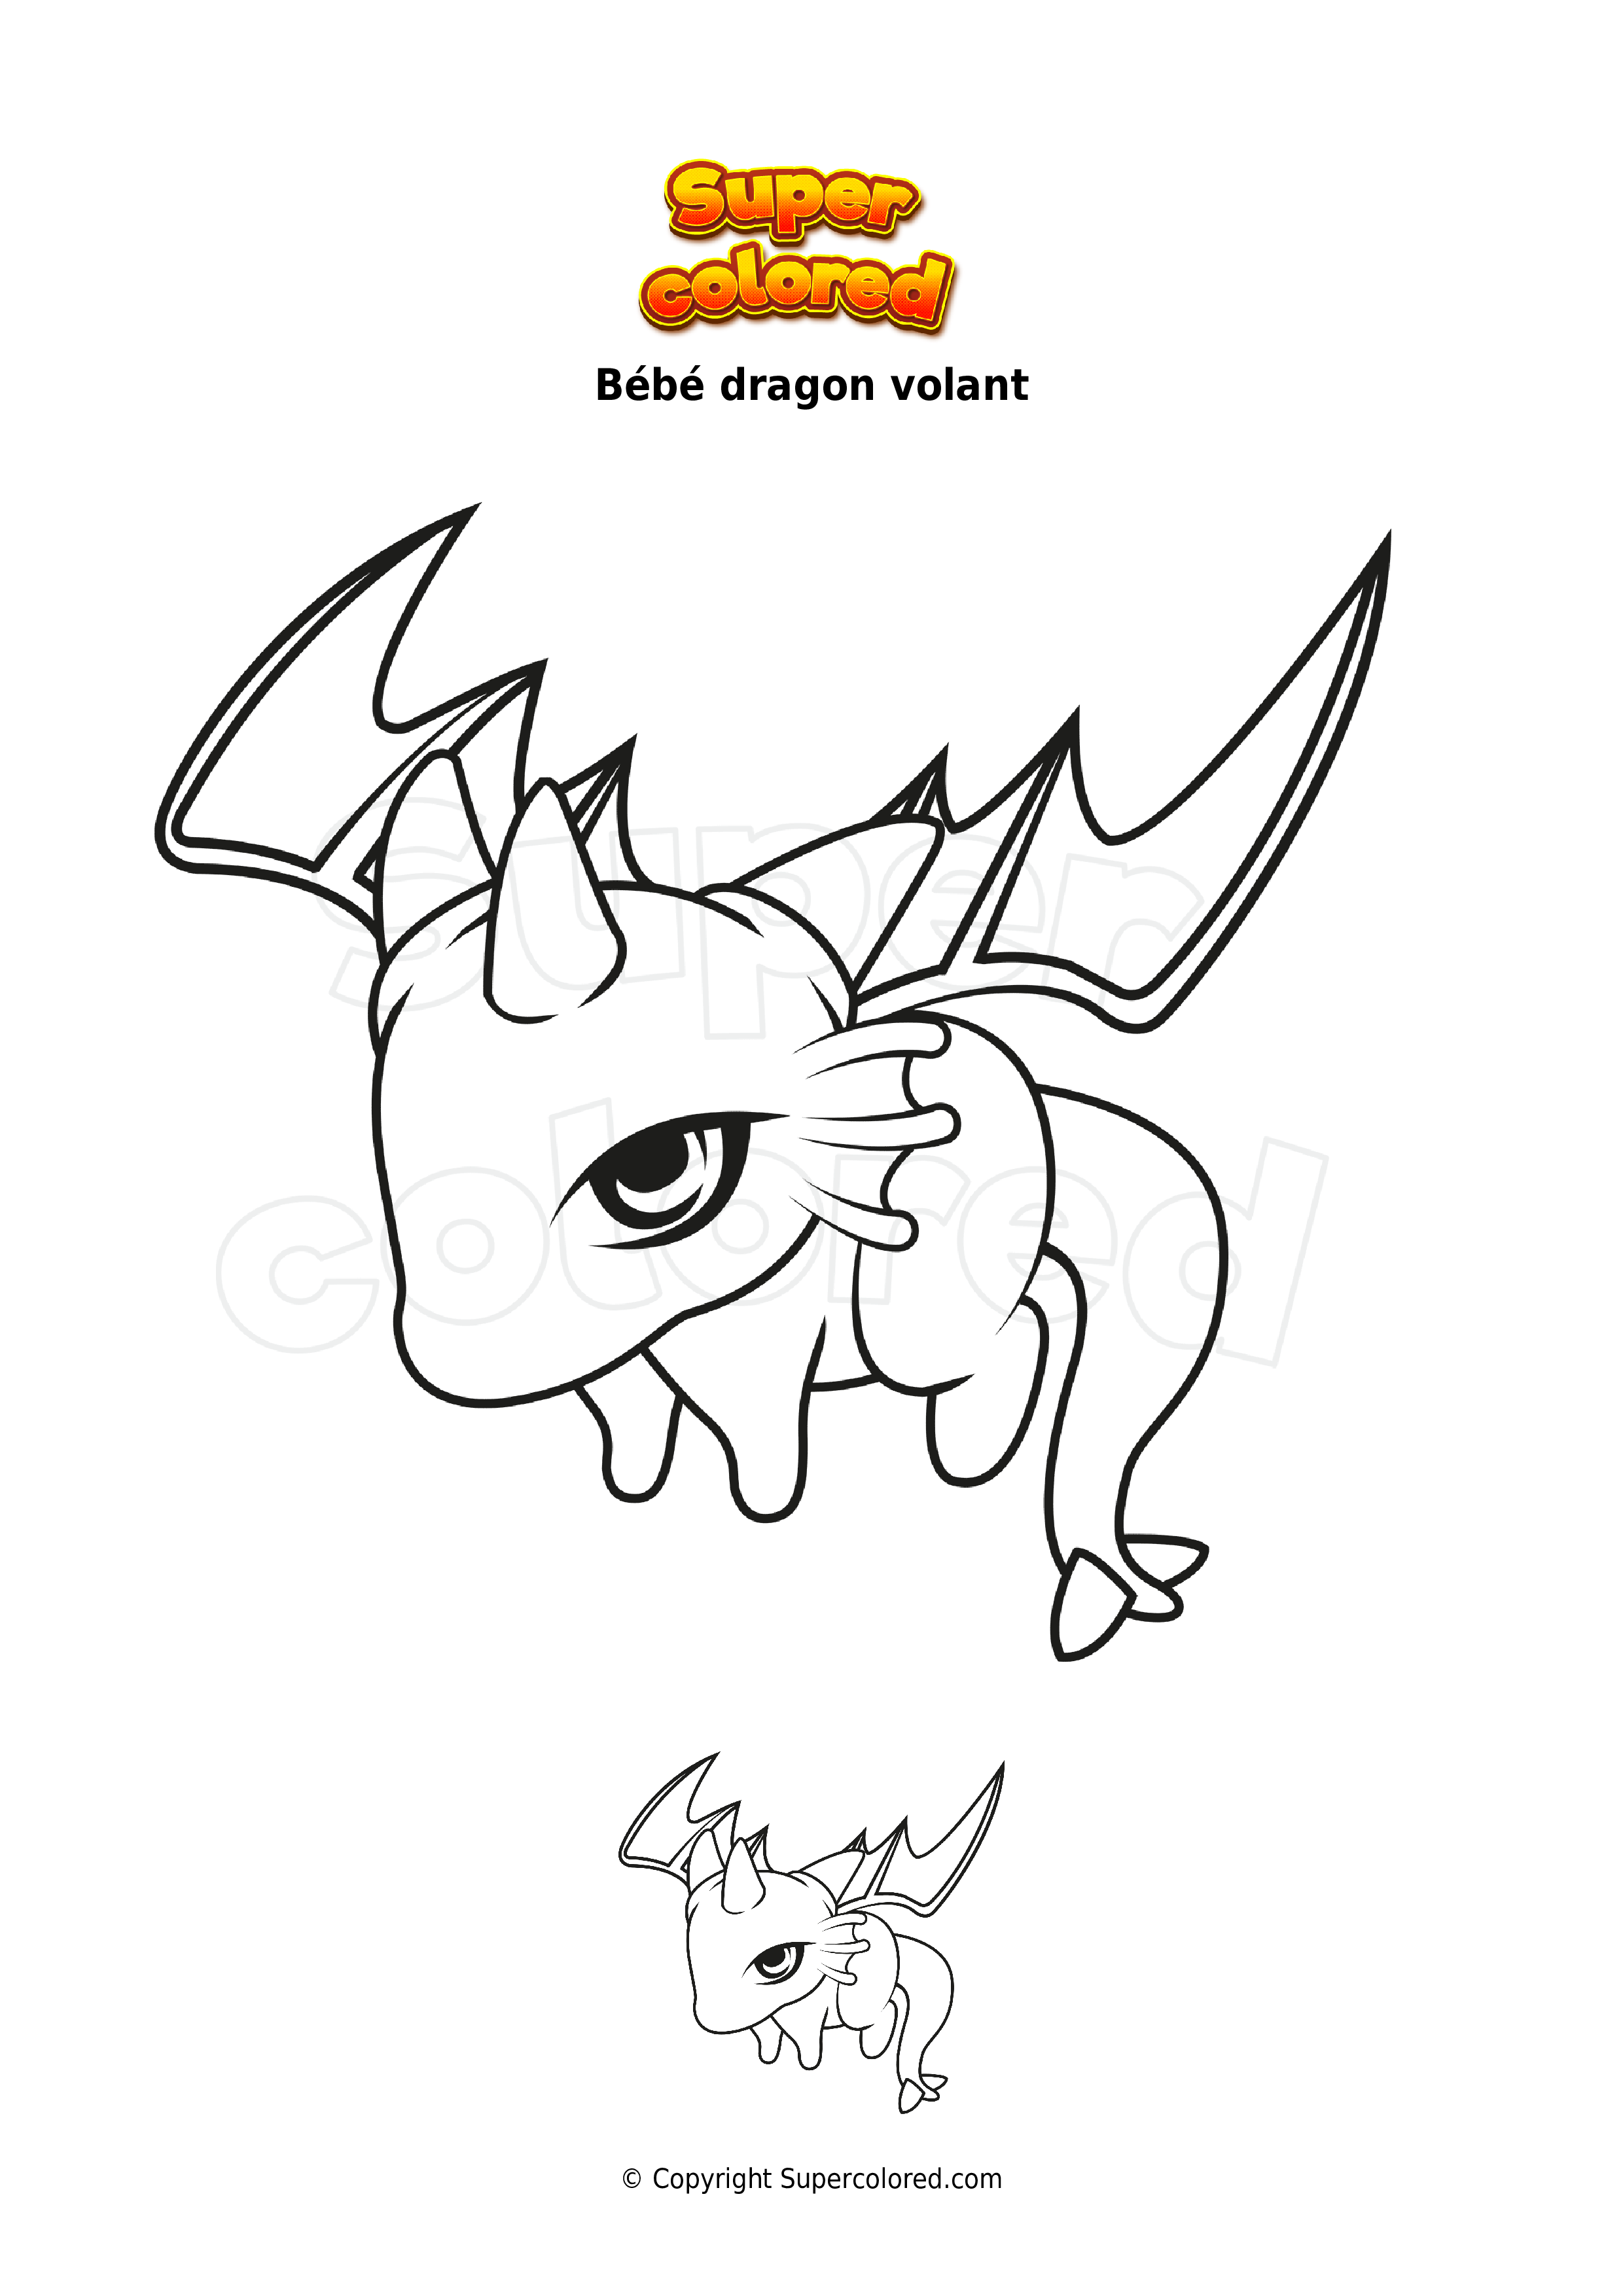 Coloriages Bebe Dragons Supercolored